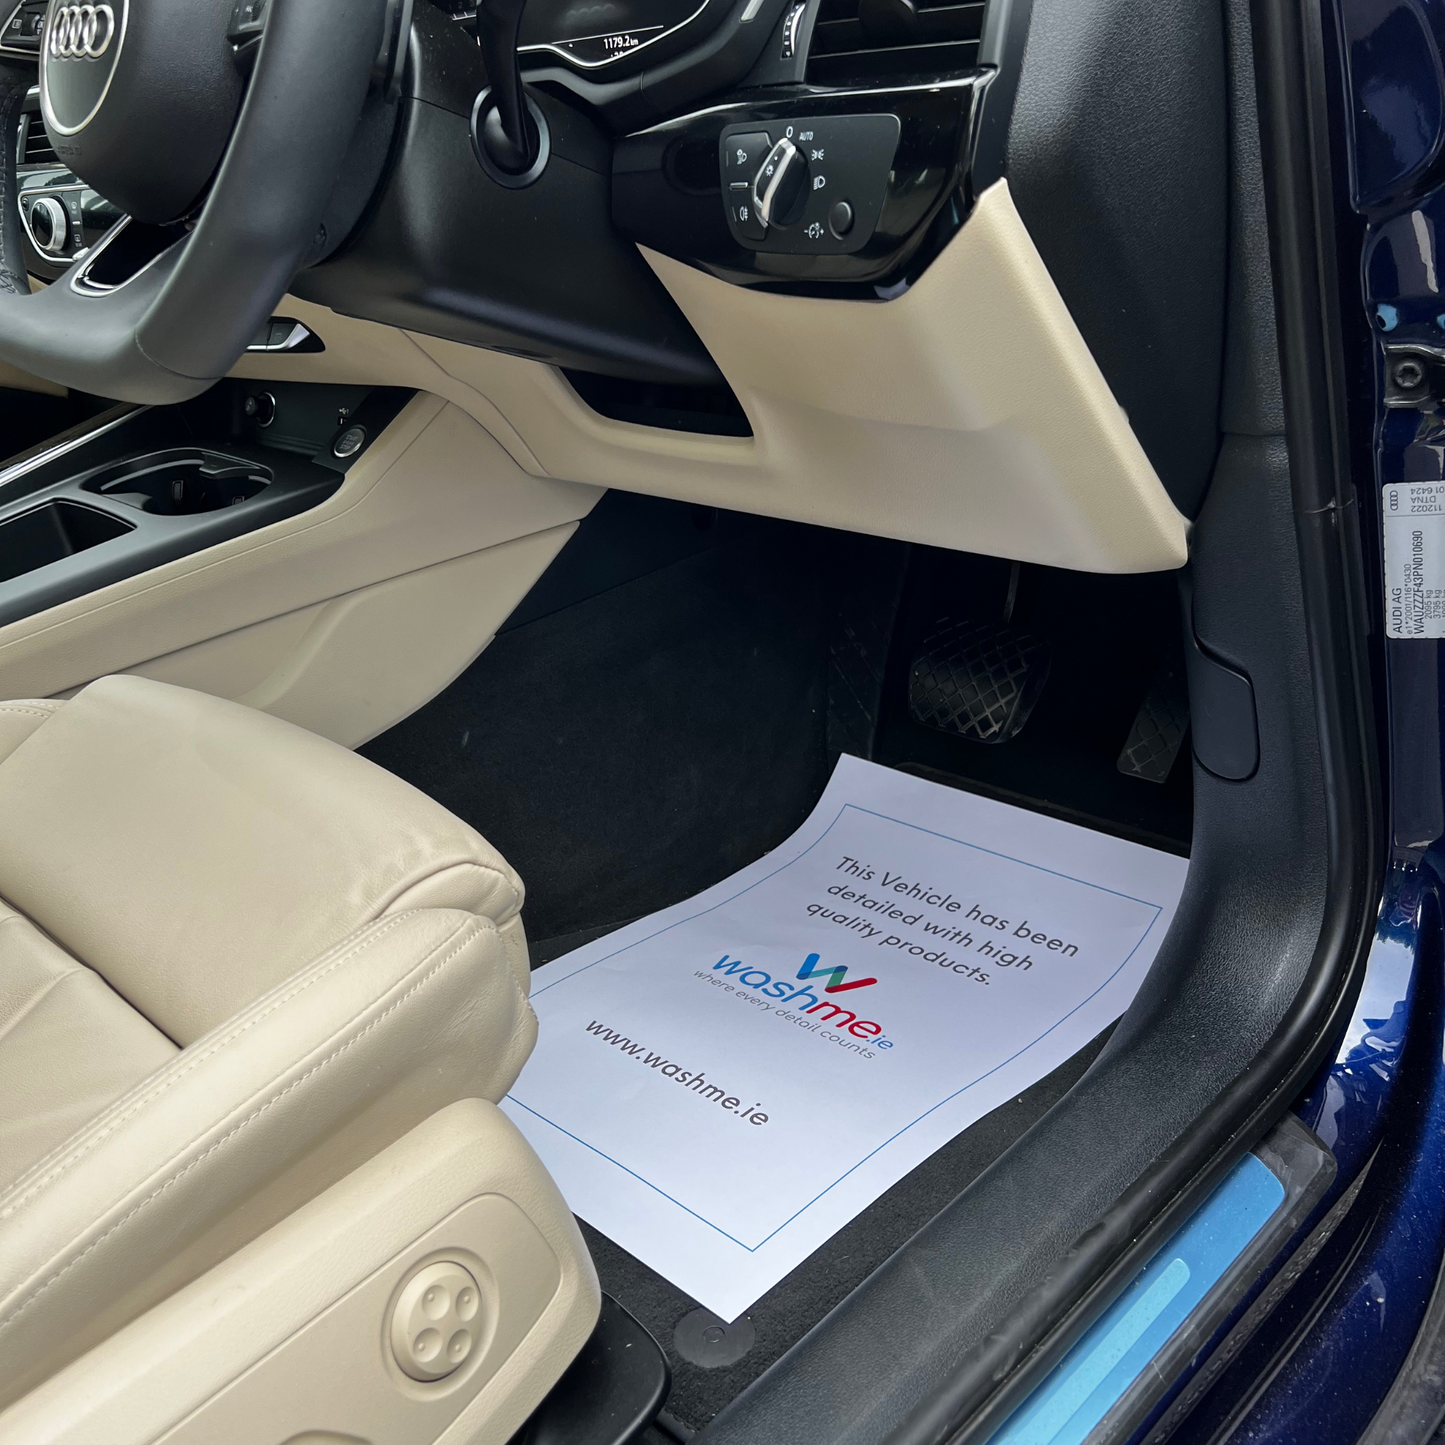 Paper mat for footwell. washme.ie Valet Mats. Paper mats for valet and detailing. footwell protection mats. washme.ie Cork Ireland. Blue Audi A4